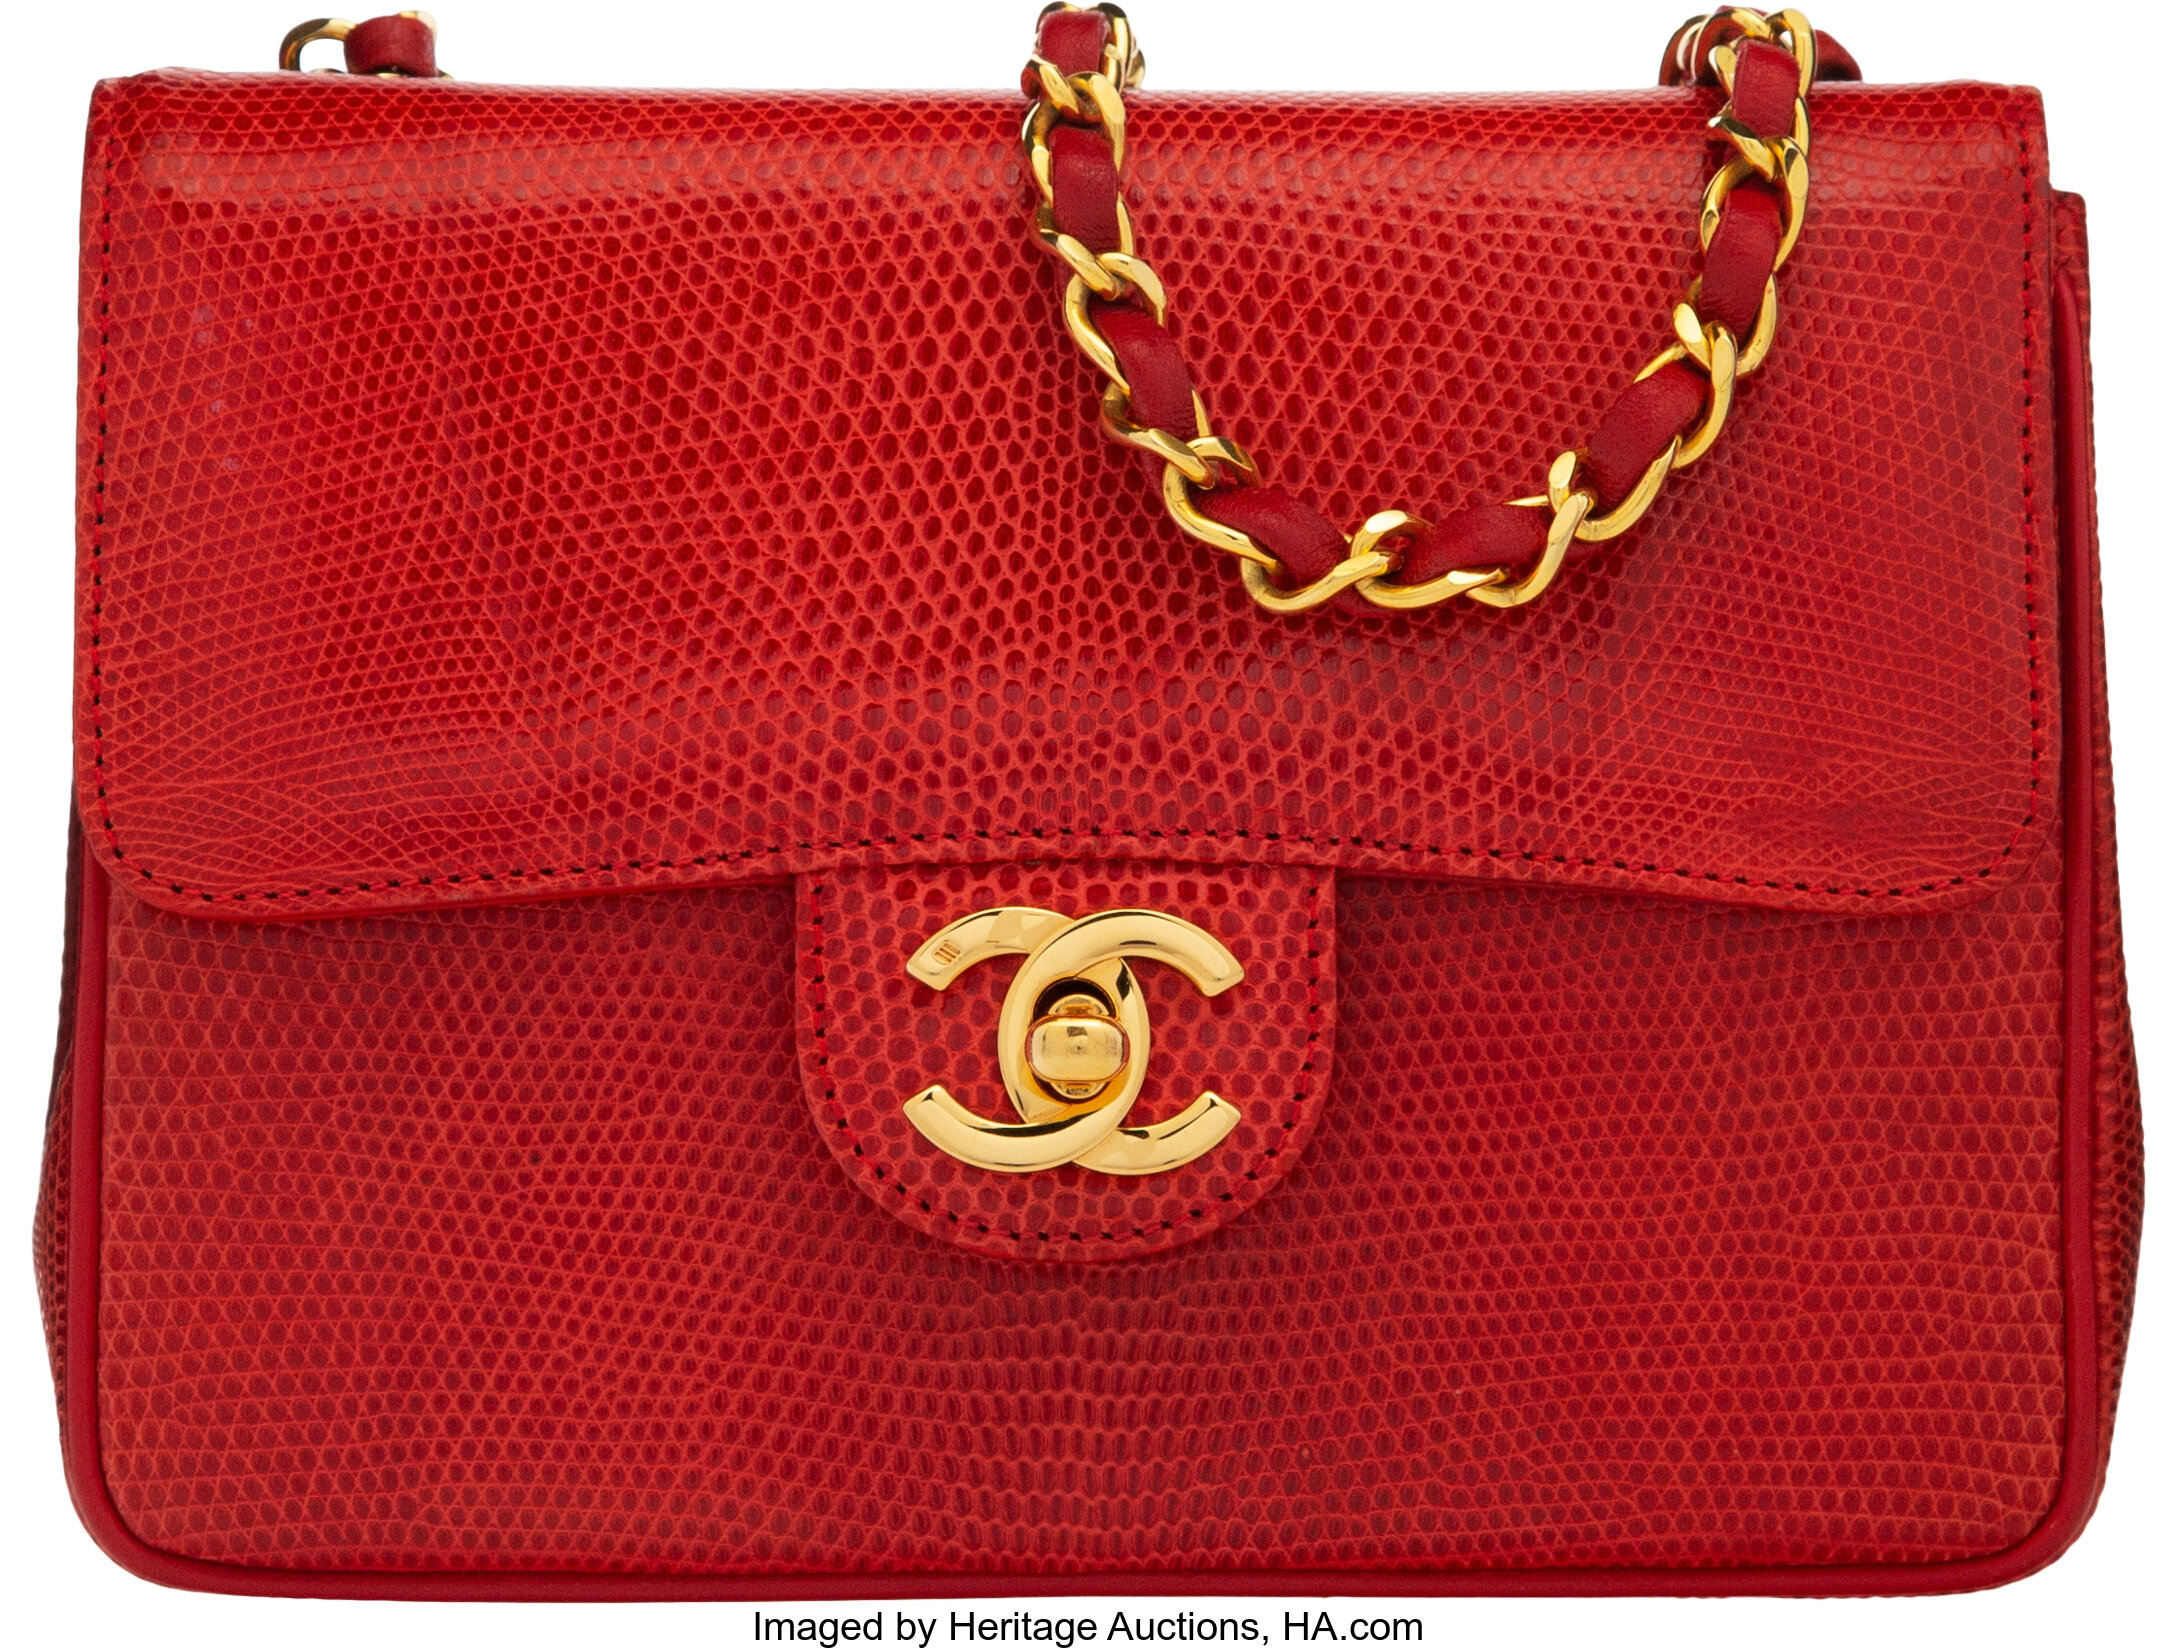 Chanel Vintage Red Lizard Mini Square Flap Bag with Gold Hardware., Lot  #58106